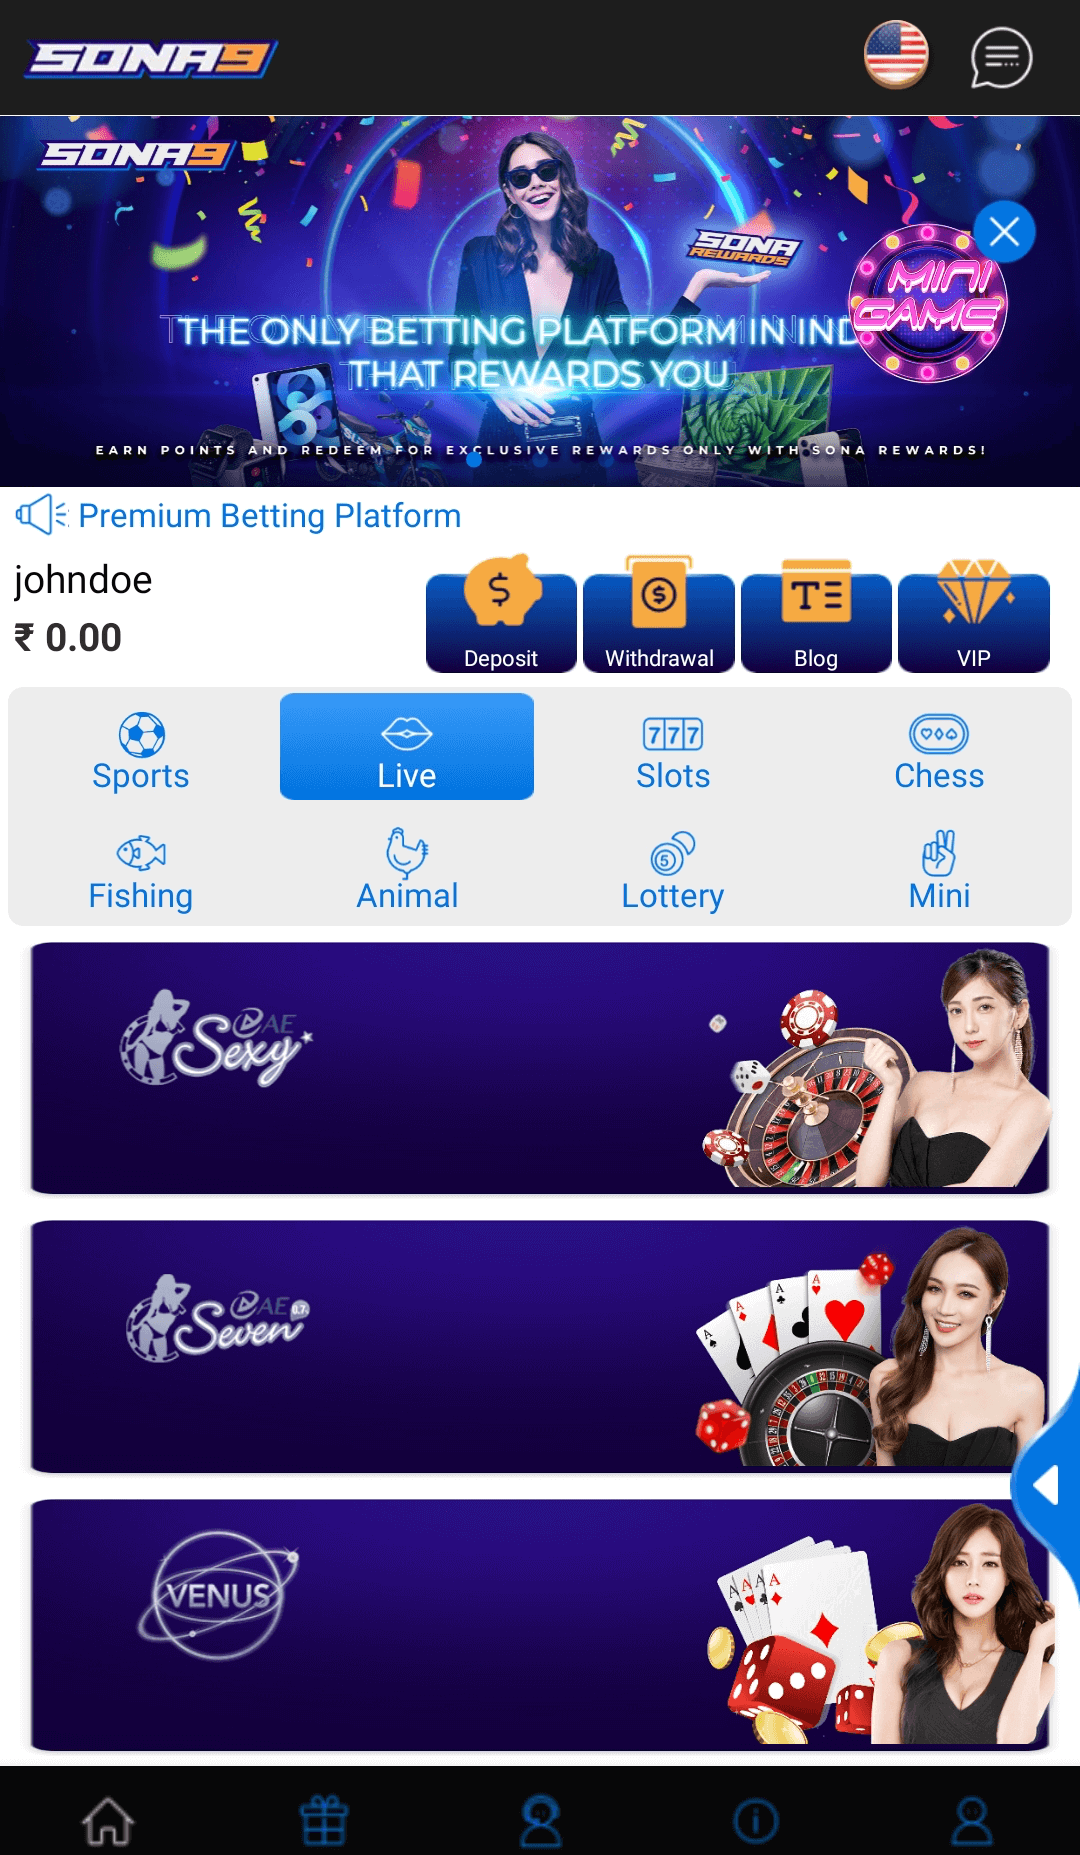 Main tab of the Sona9 mobile app